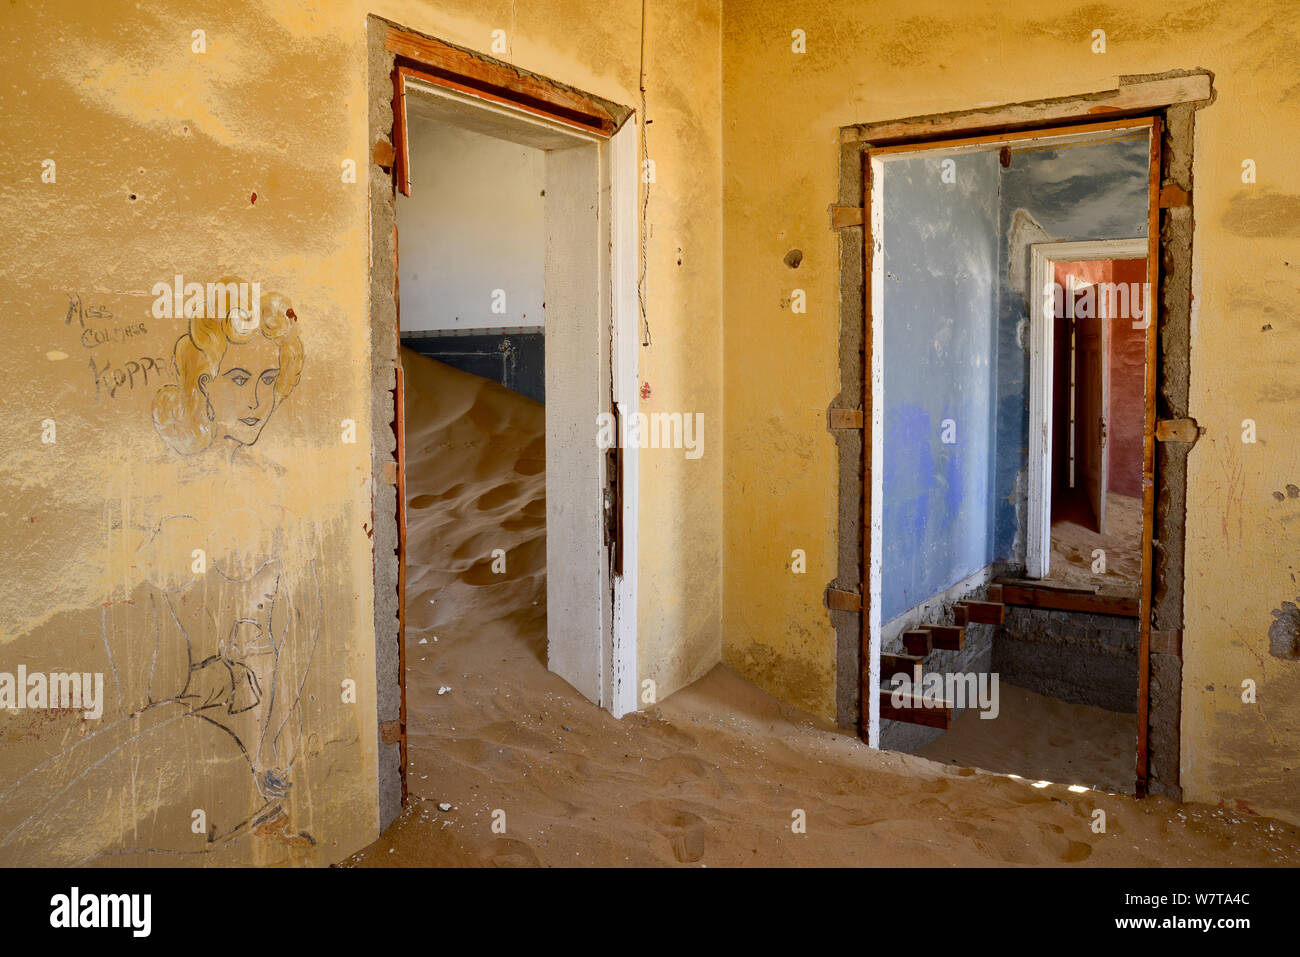 Abandoned house full of sand, Kolmanskop Ghost Town, an old diamond-mining town where shifting sand dunes have encroached abandoned houses, Namib Desert Namibia, October 2013. Stock Photo